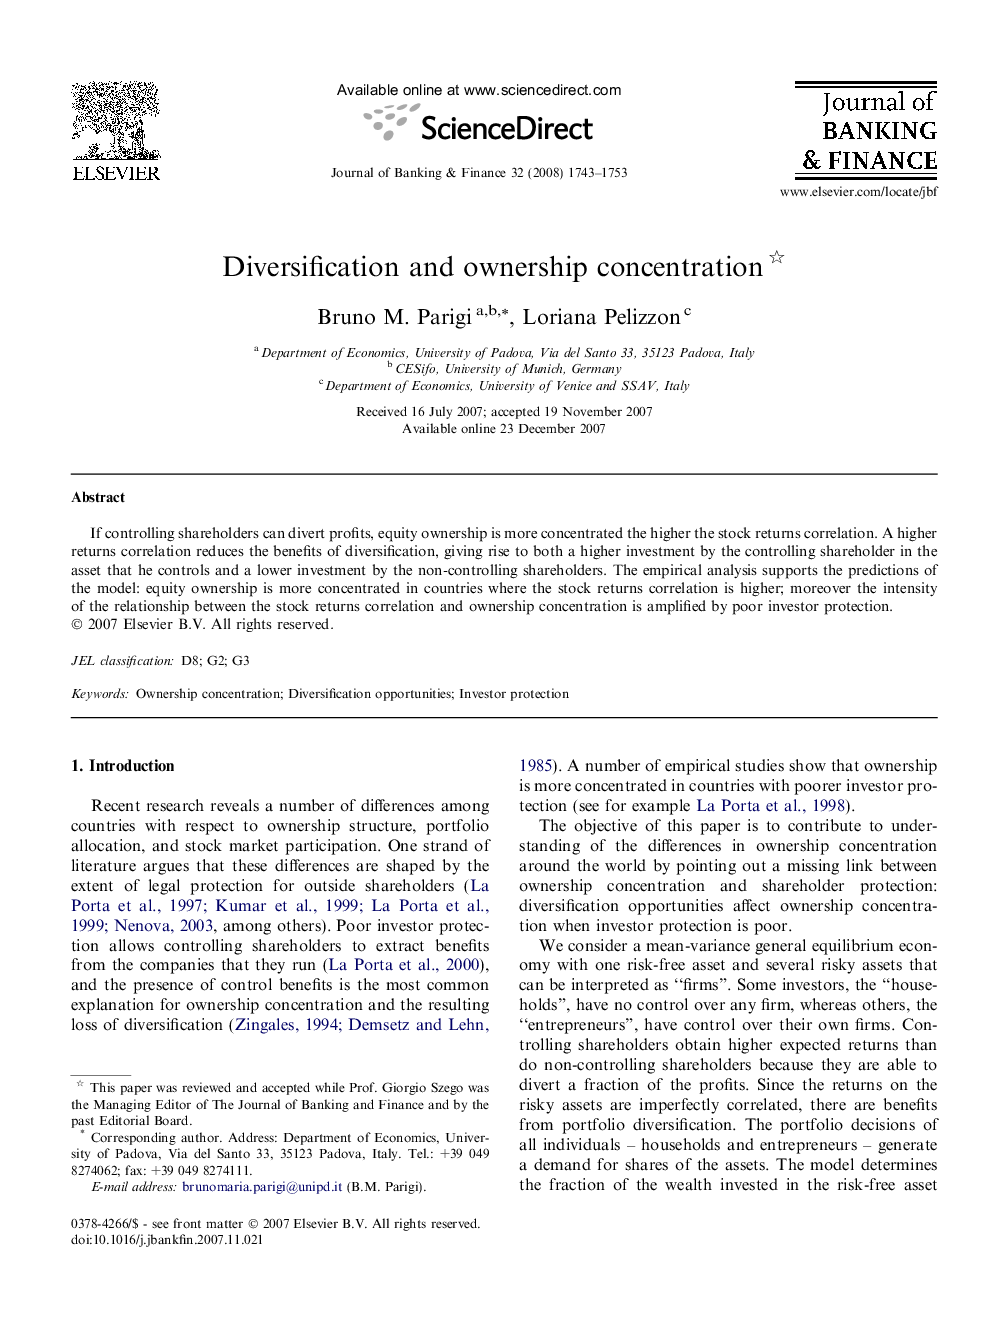 Diversification and ownership concentration